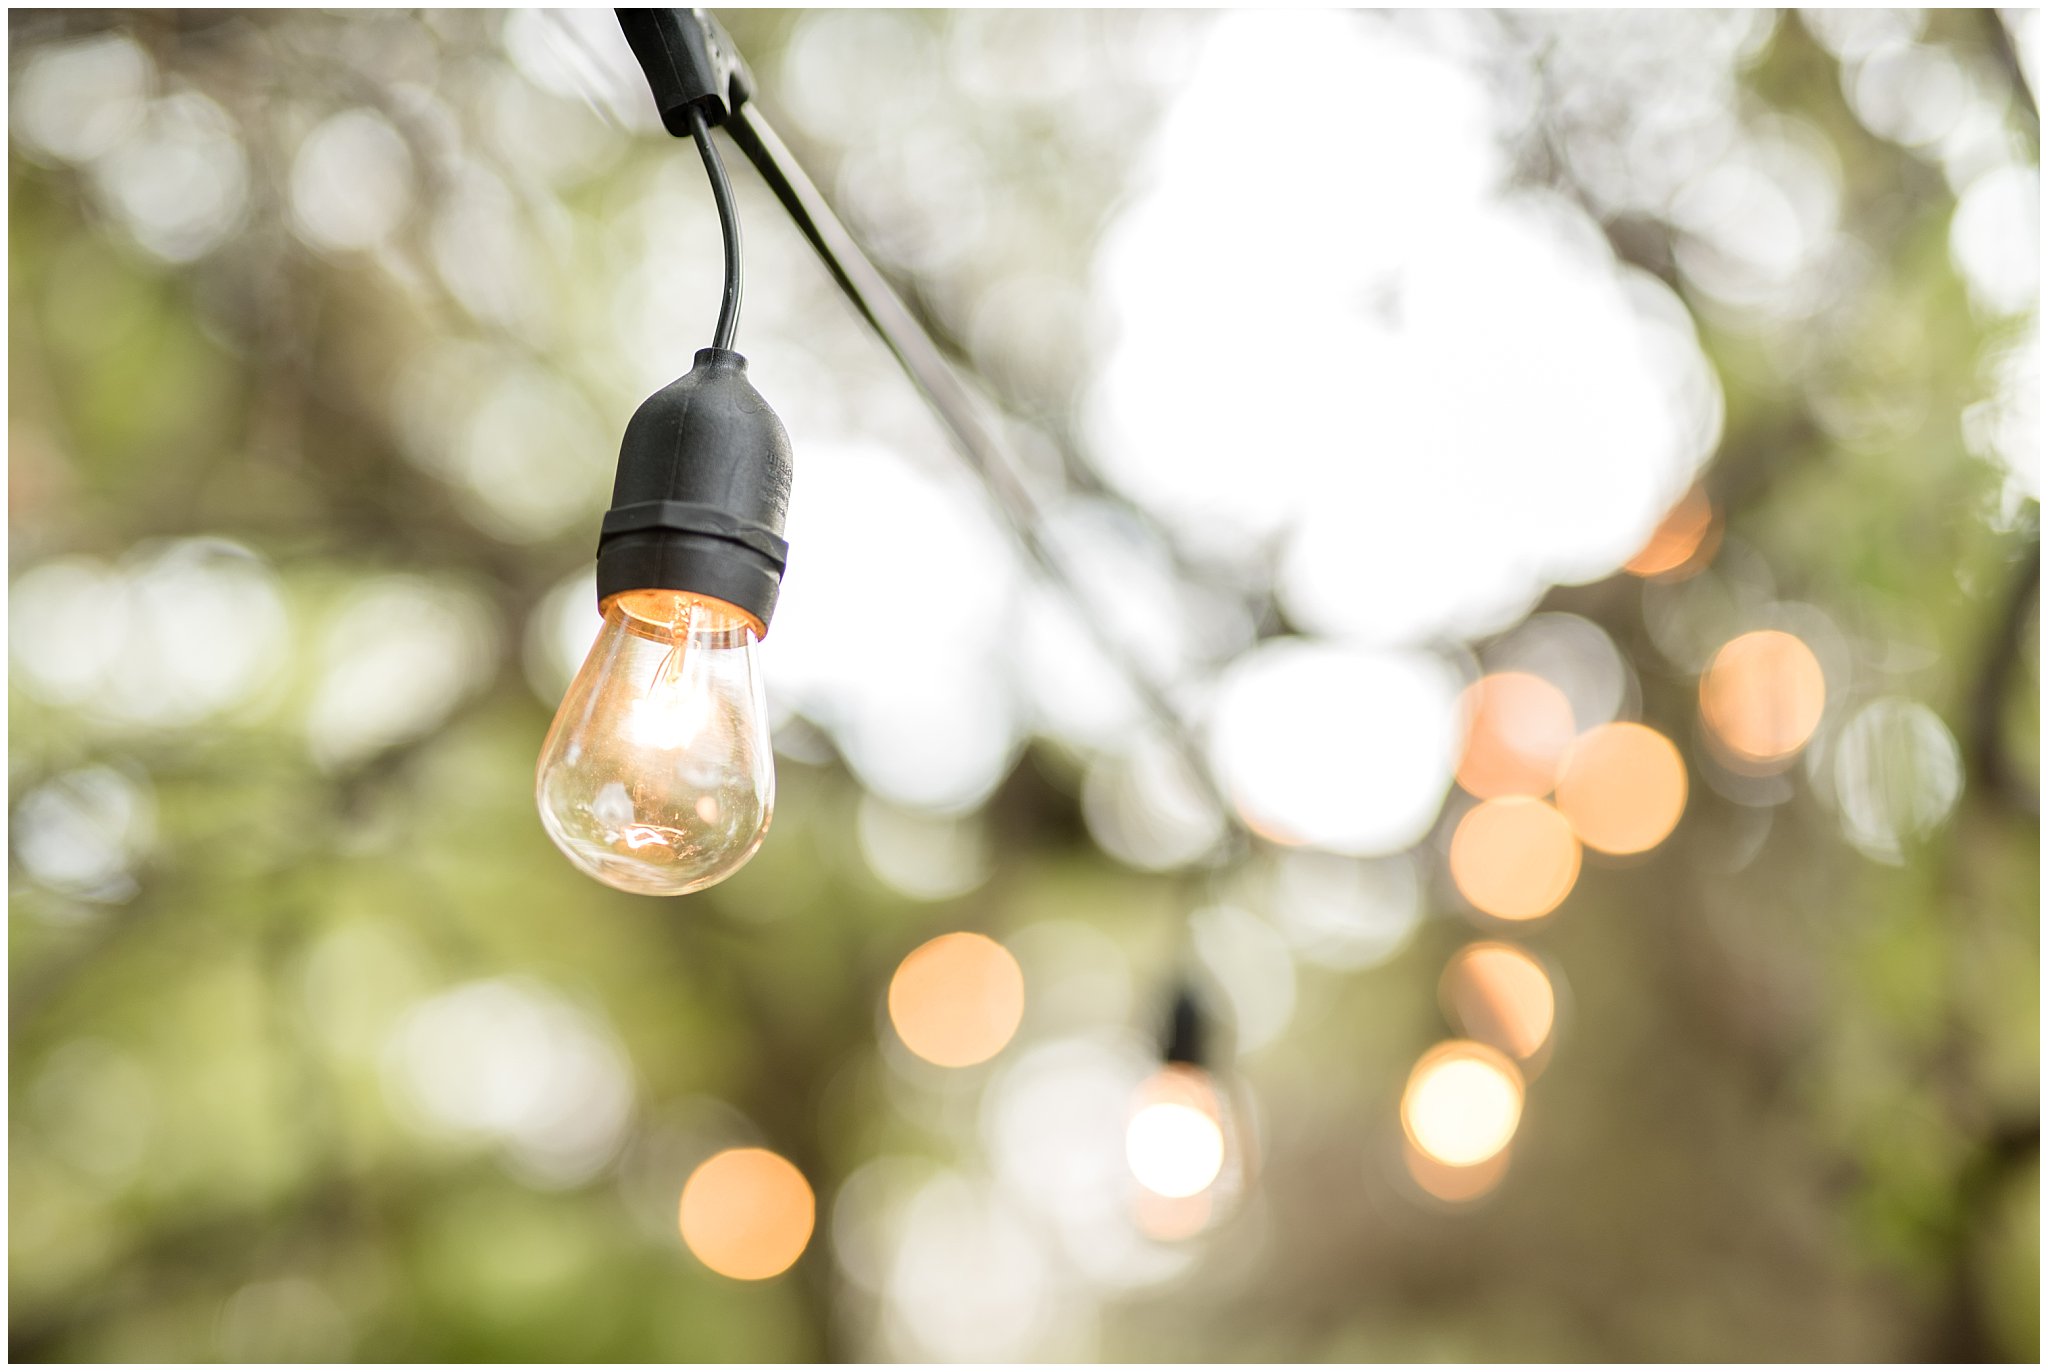 Hanging lights at wedding reception | Red and Grey wedding | Davis County Outdoor Wedding | Jessie and Dallin Photography